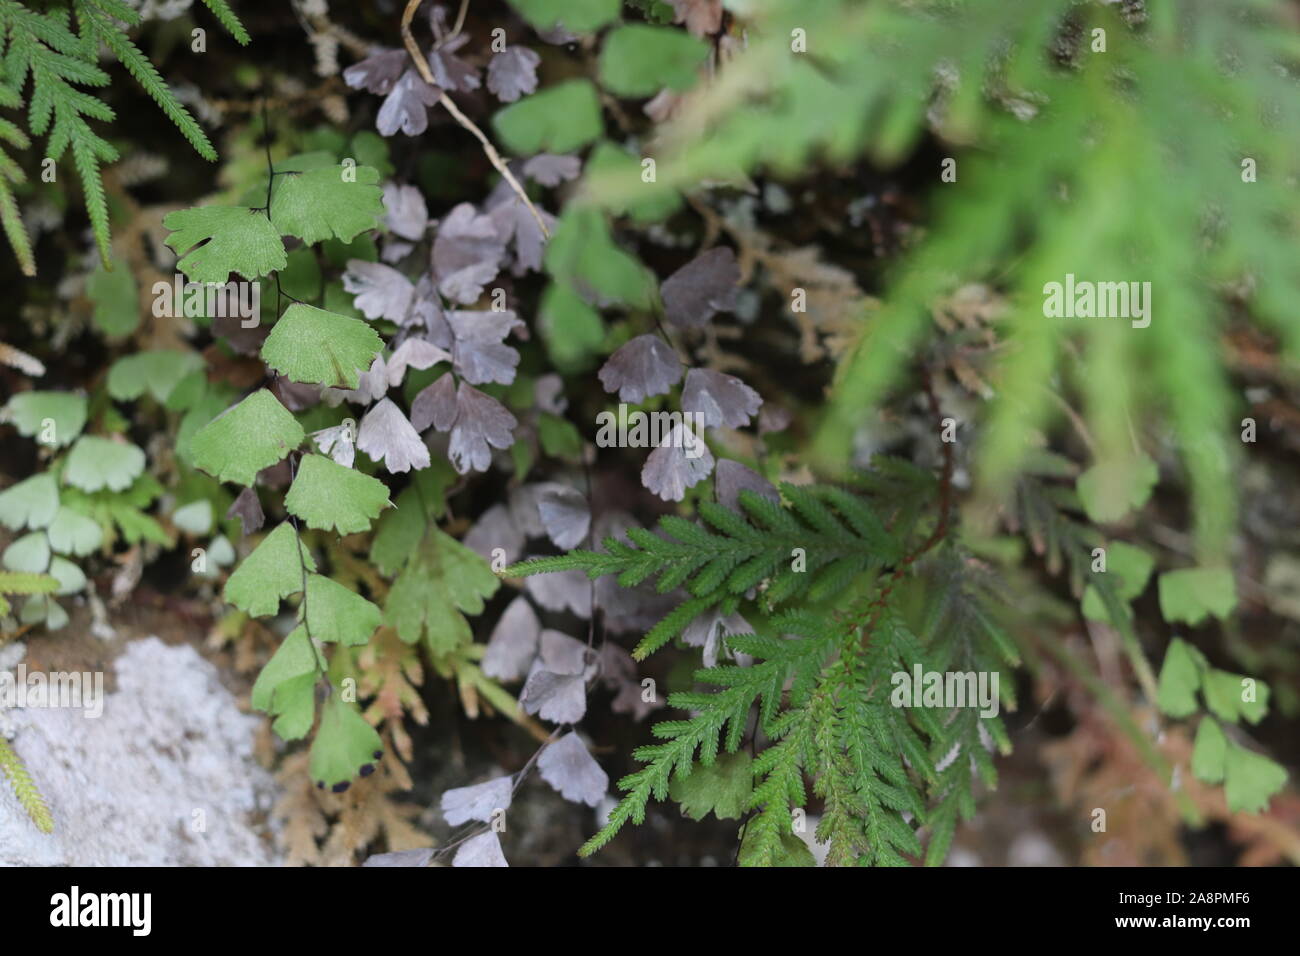 Maidenhair a small fern of widespread distribution Stock Photo